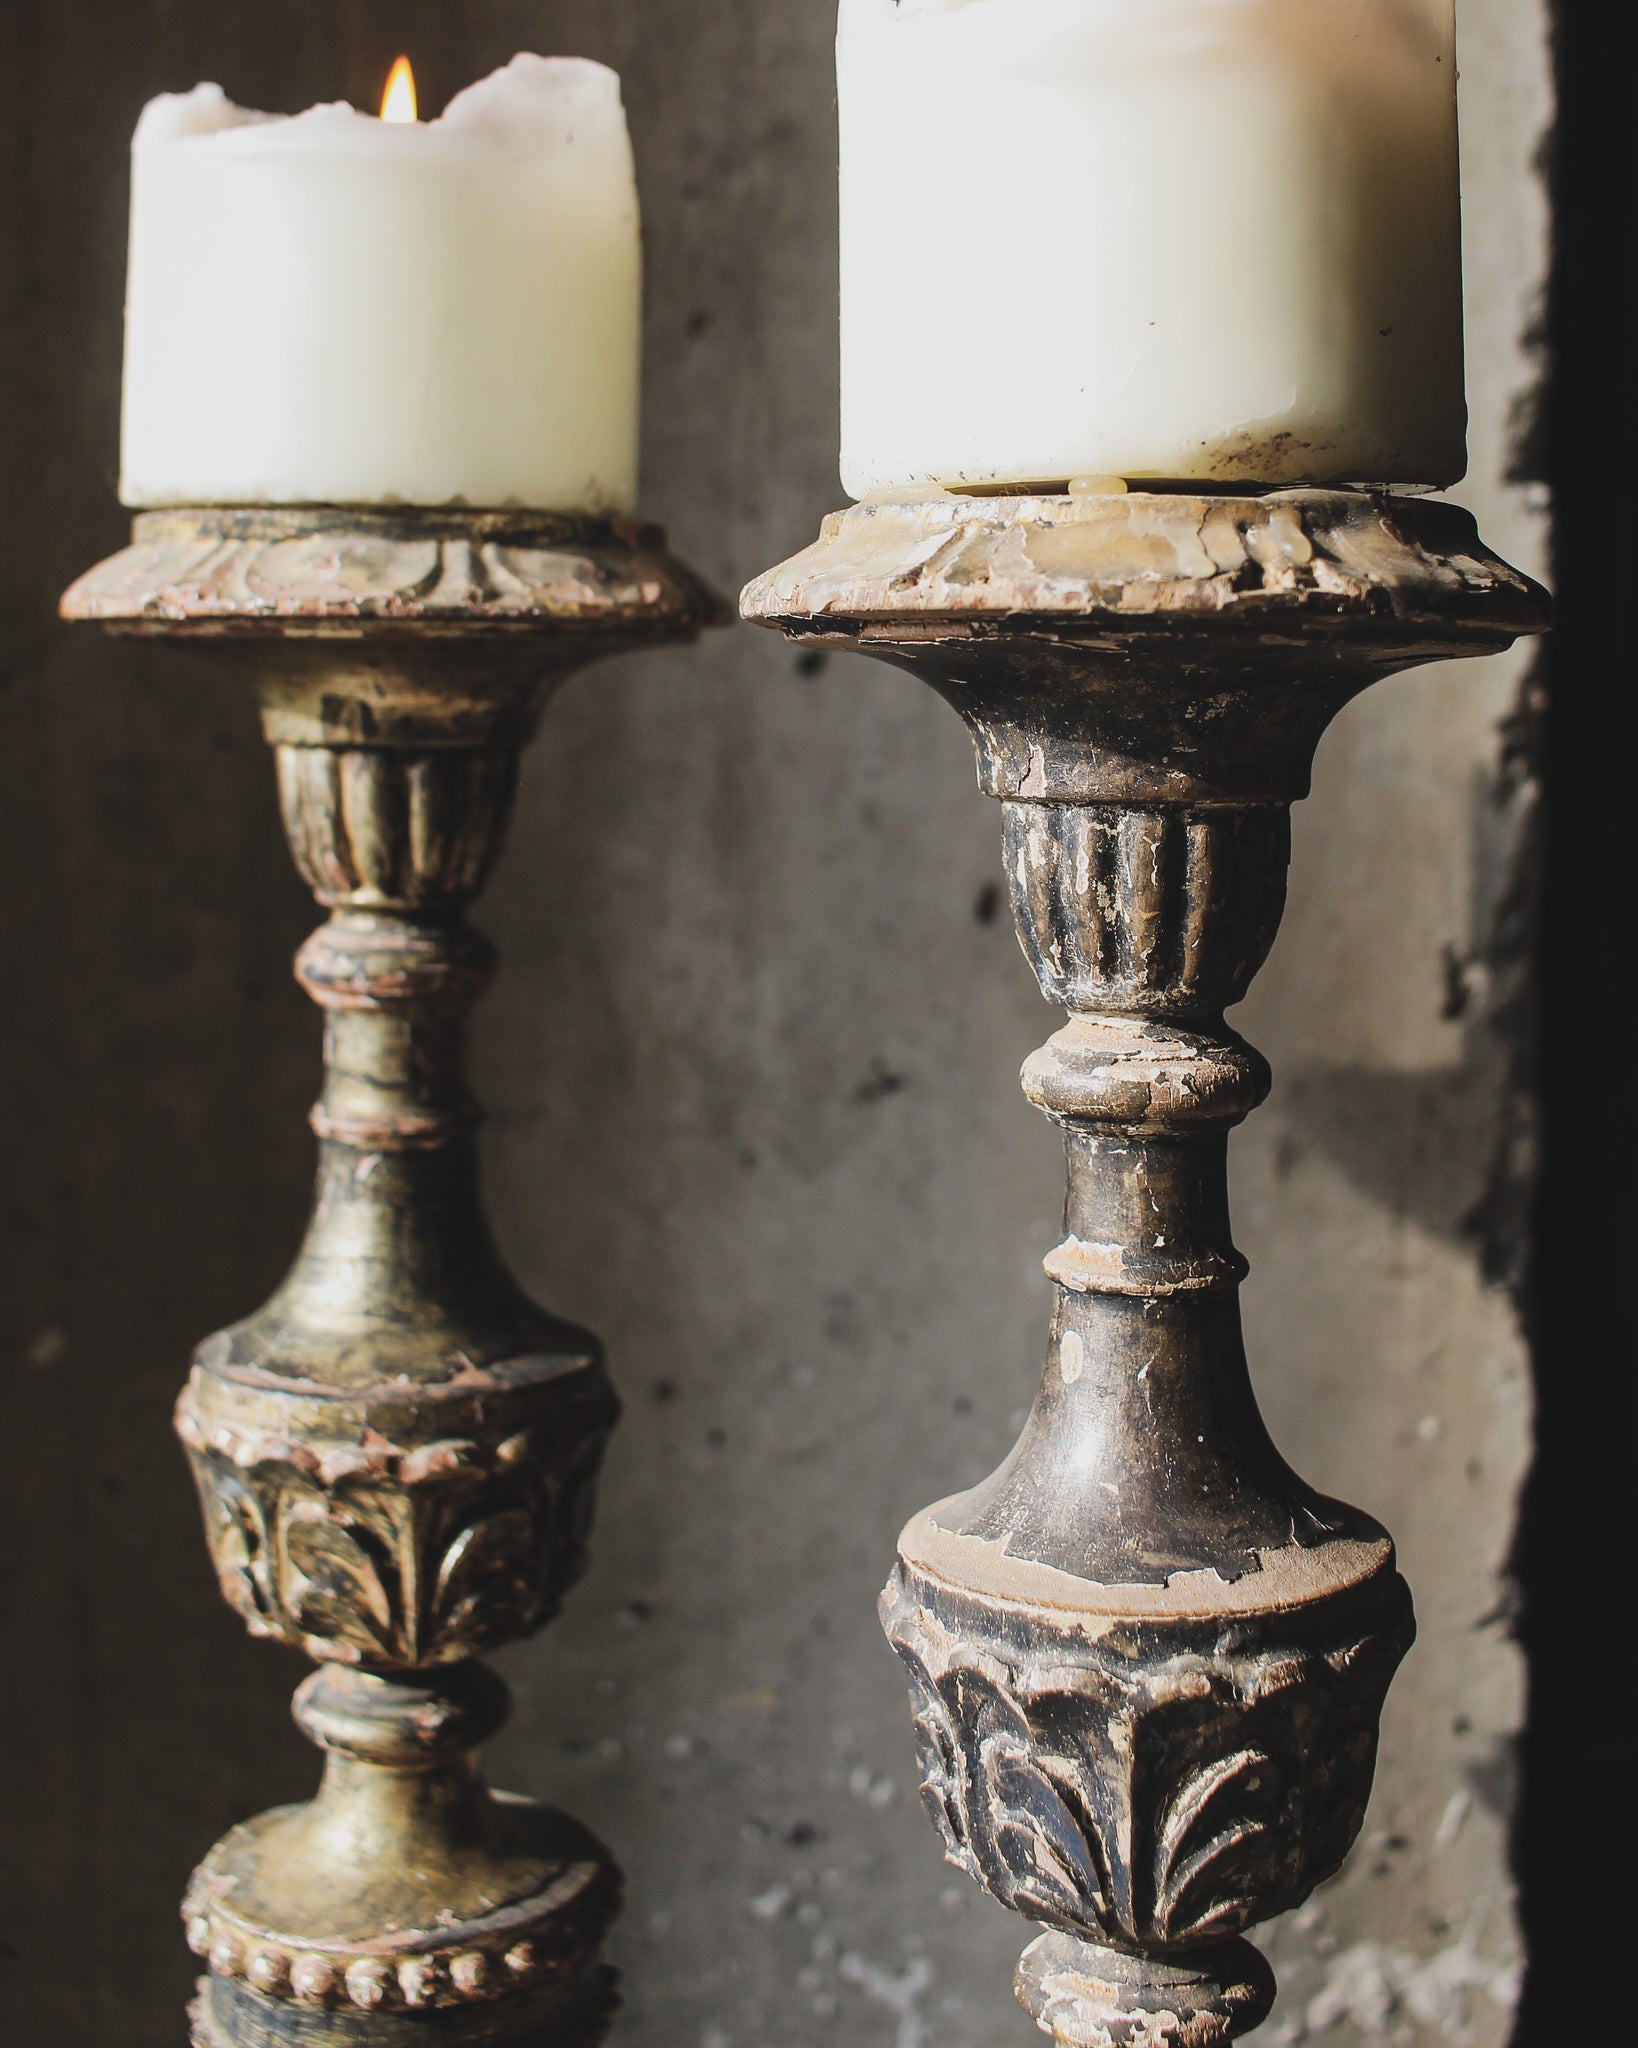 Pair of Polychrome Decorated Candlesticks